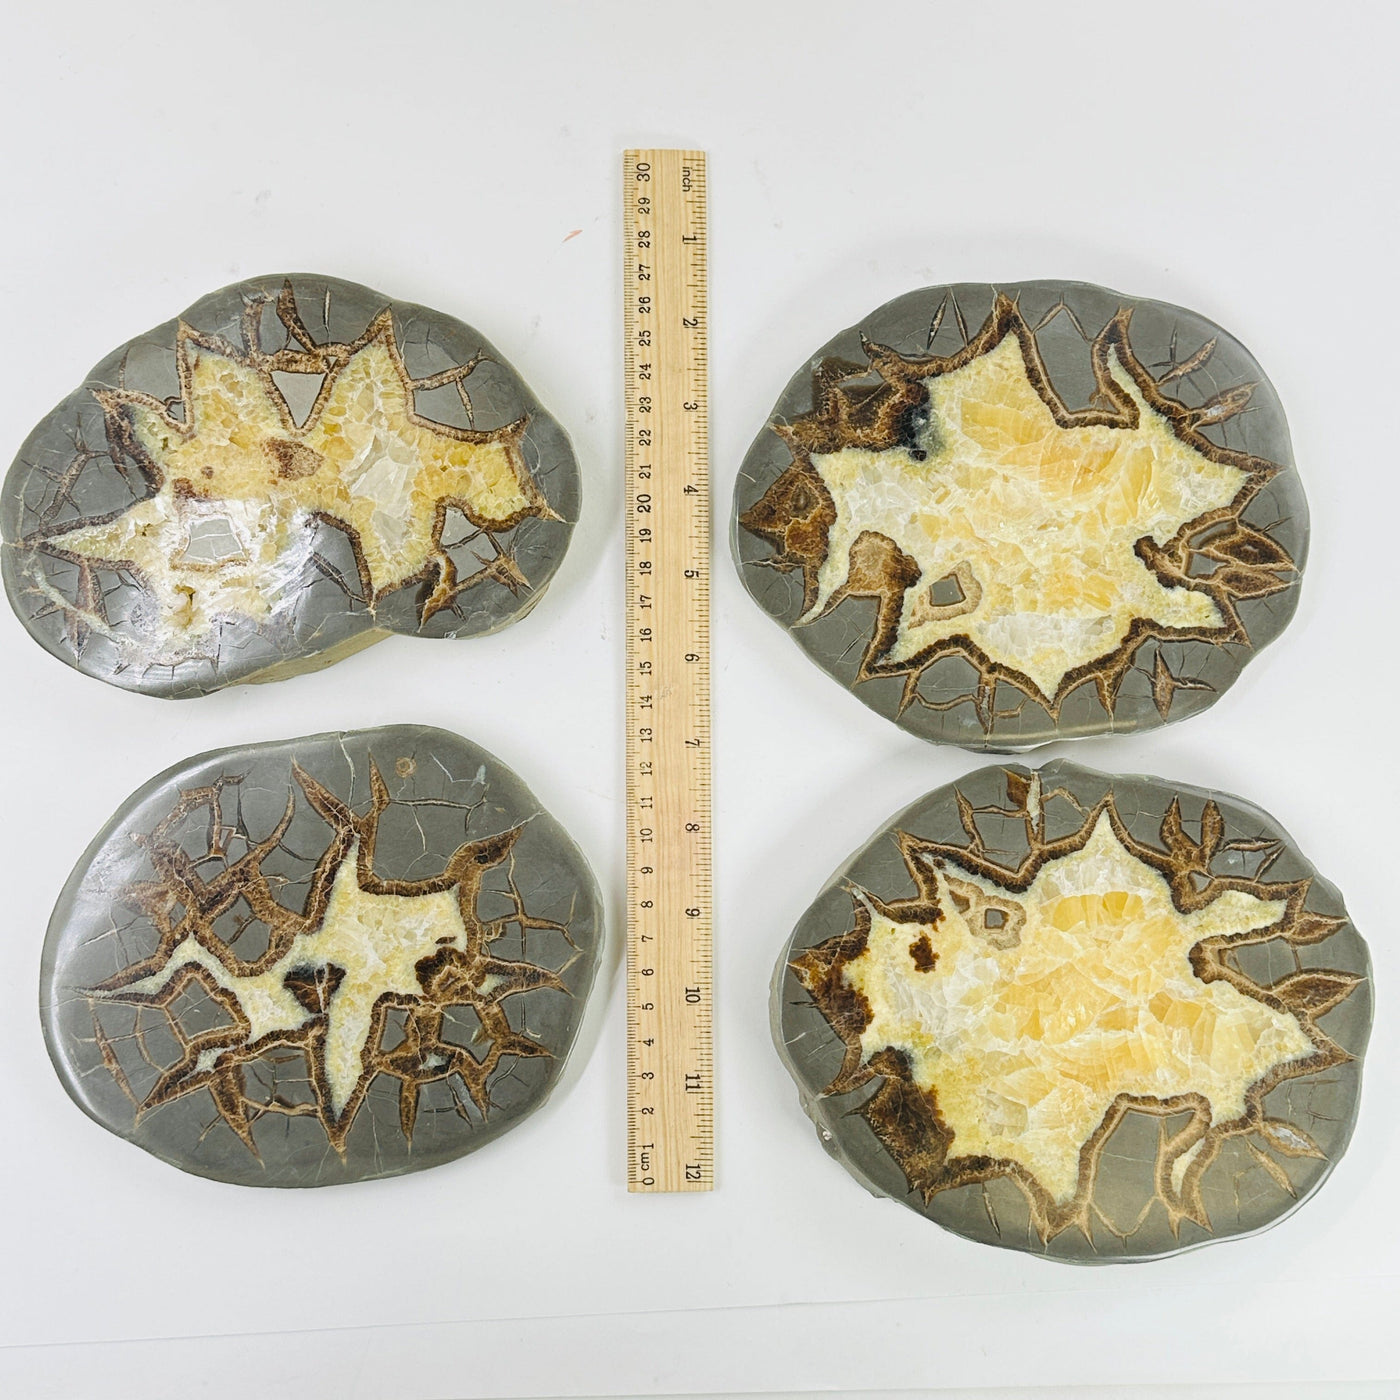 Septarian coasters next to a ruler for size reference